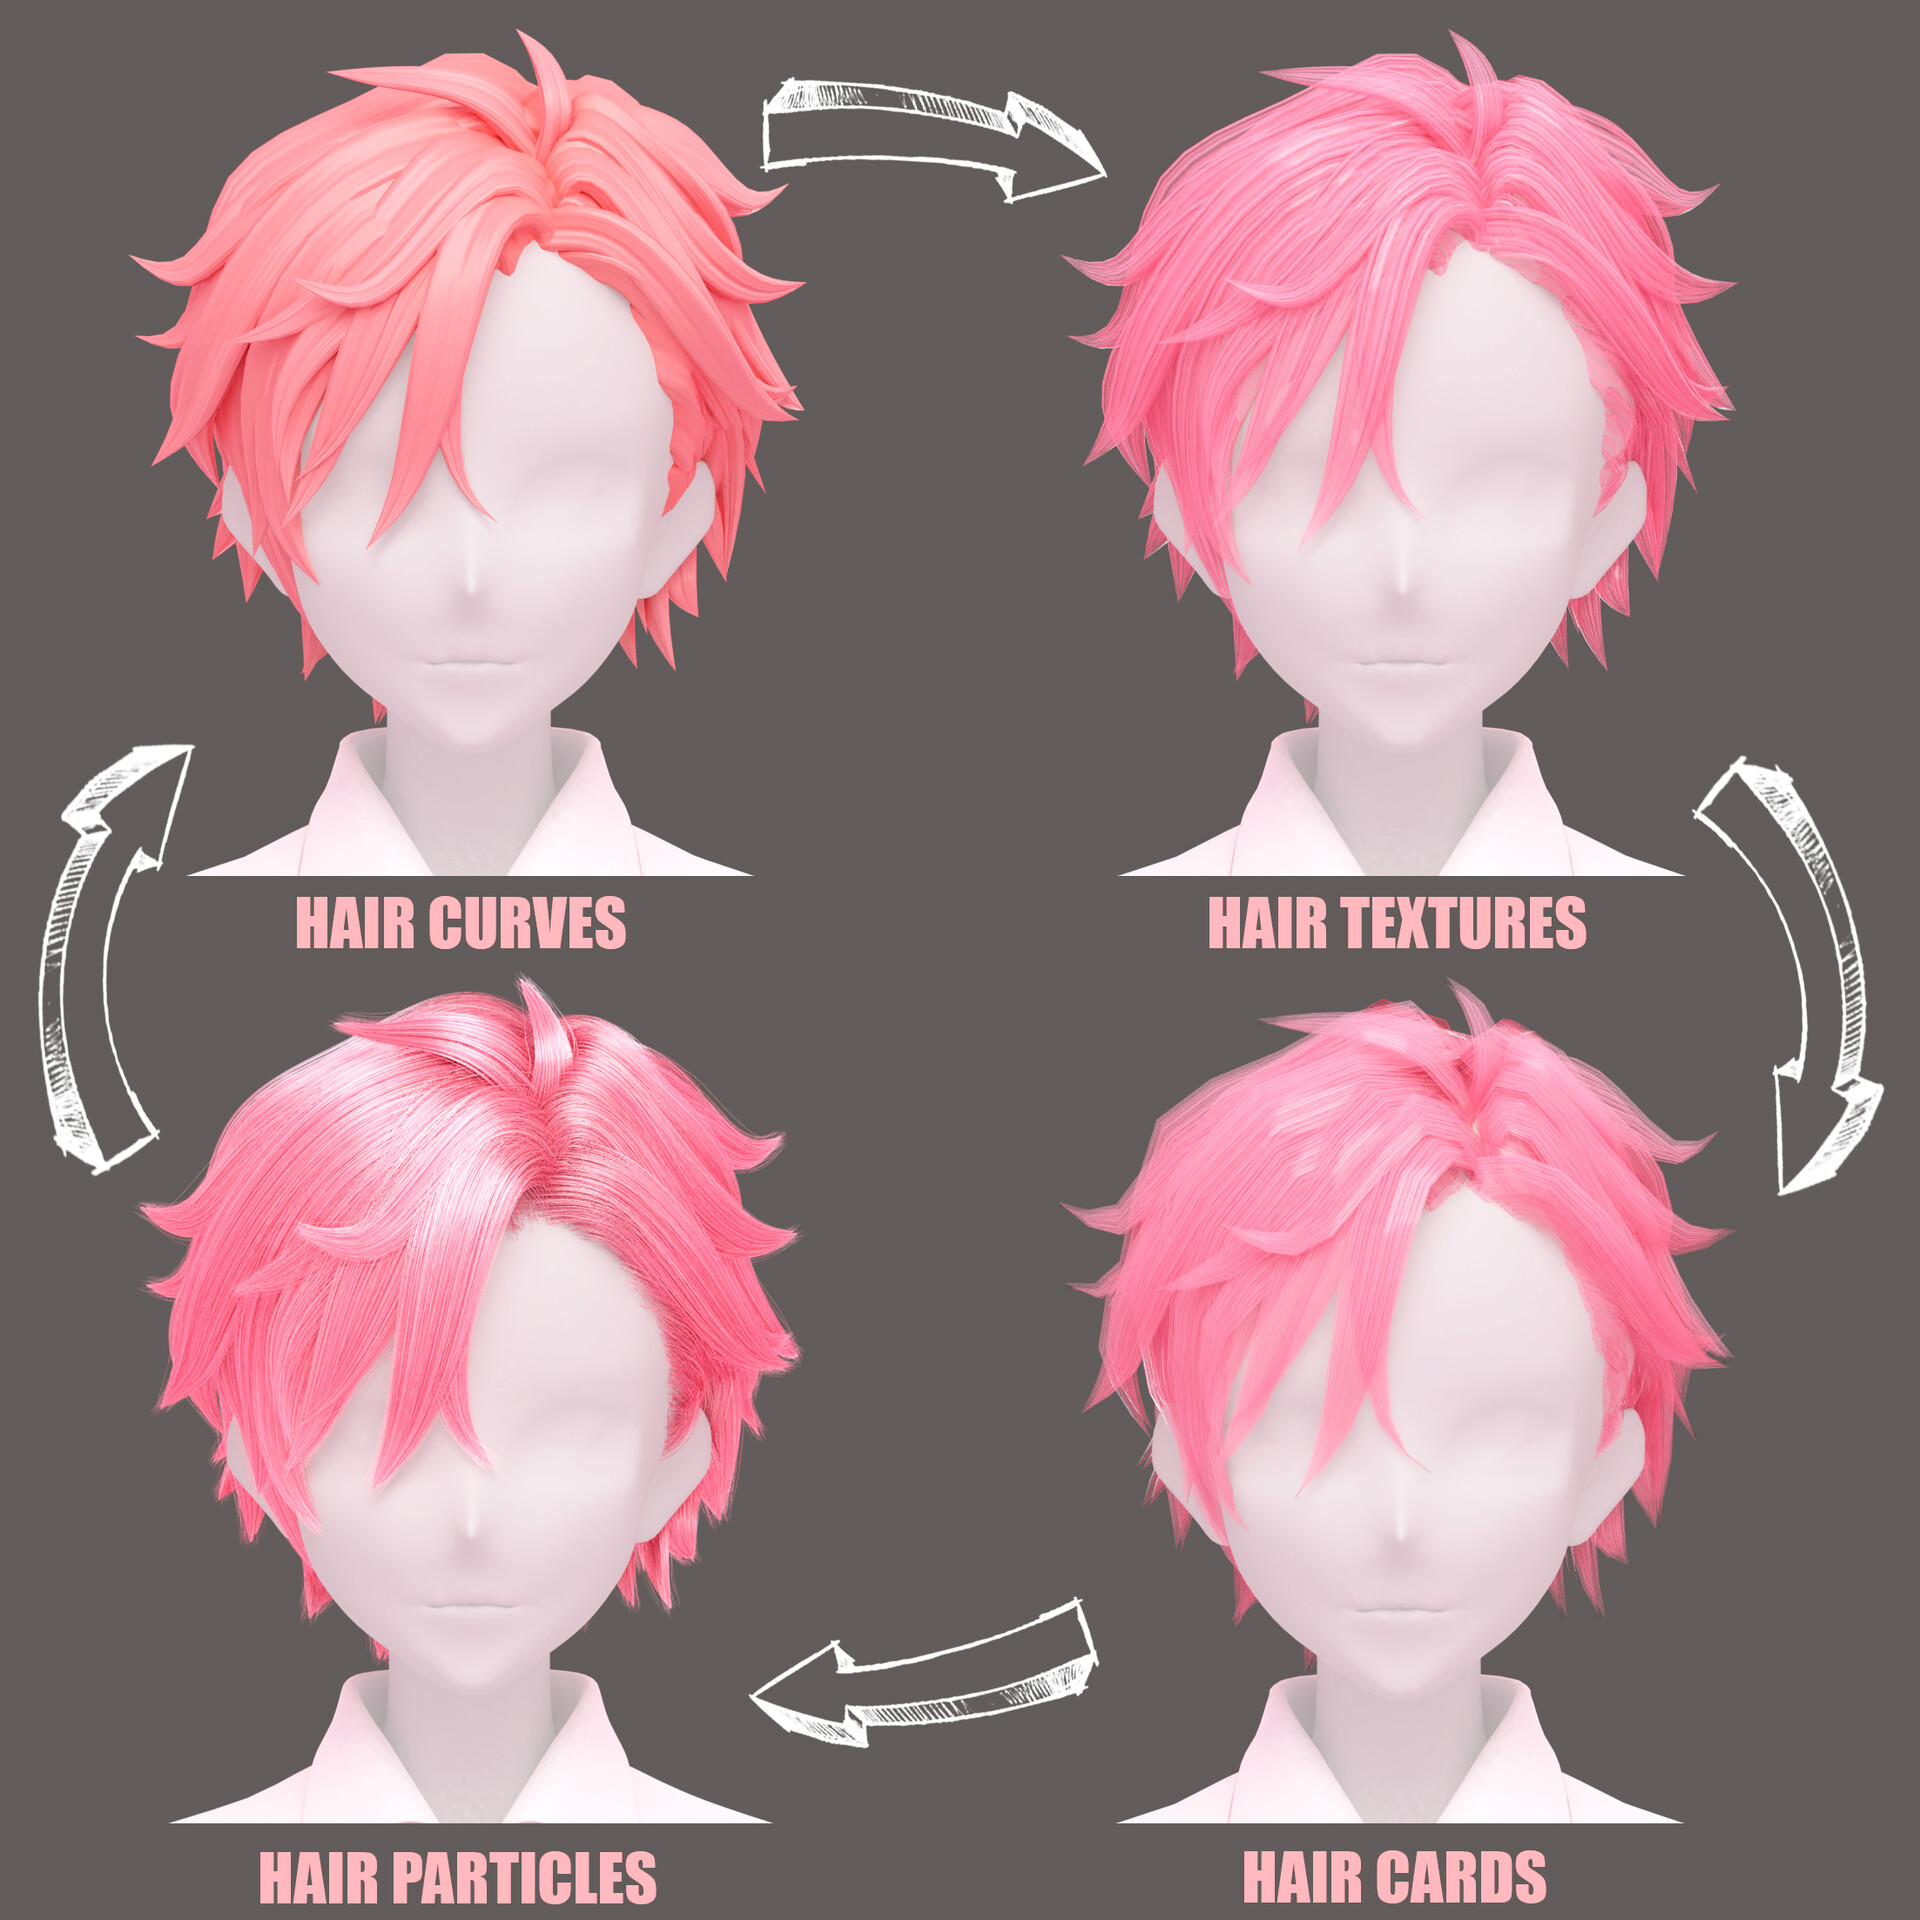 1,273 Boy Hairstyles Anime Hairstyles Images, Stock Photos & Vectors |  Shutterstock